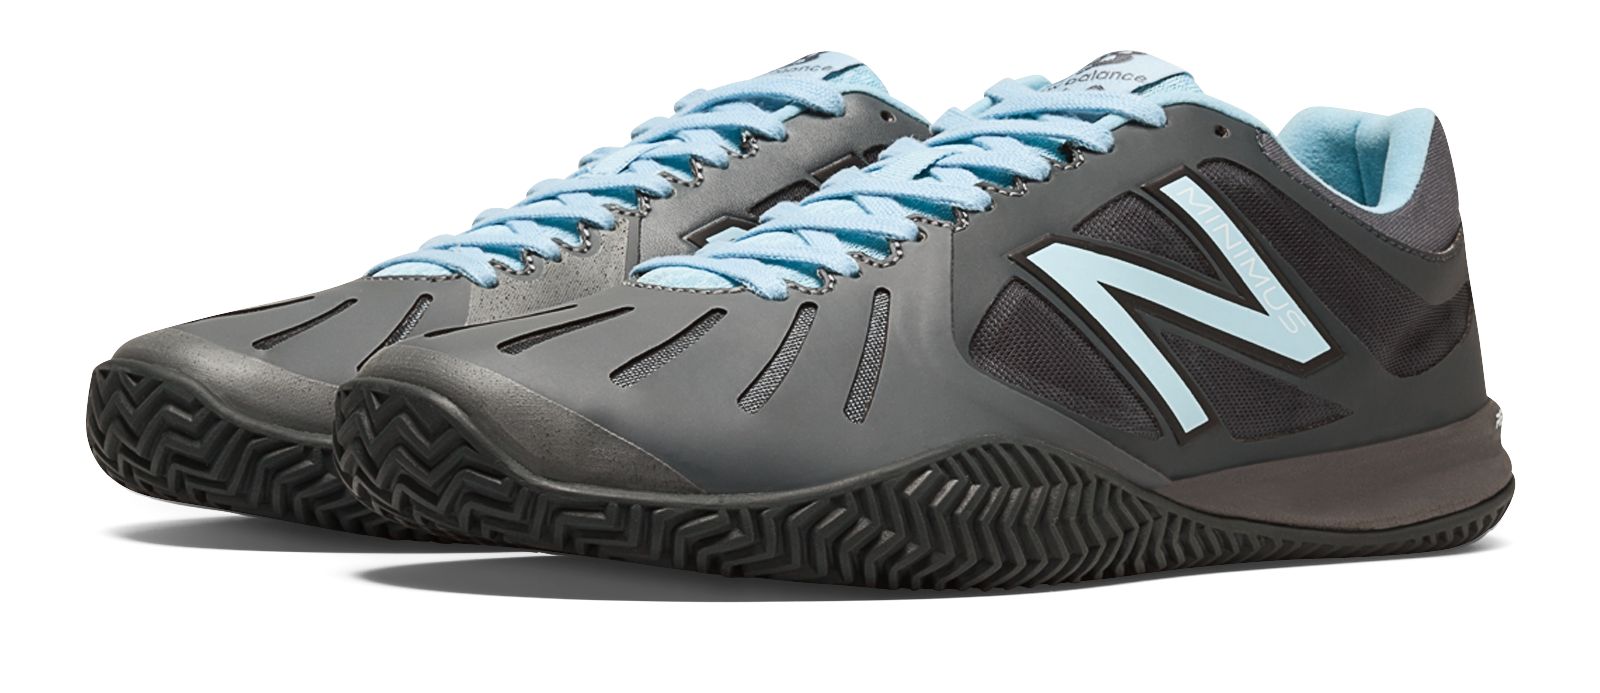 New Balance MC60 on Sale - Discounts Up to 20% Off on MC60GB at Joe's New  Balance Outlet